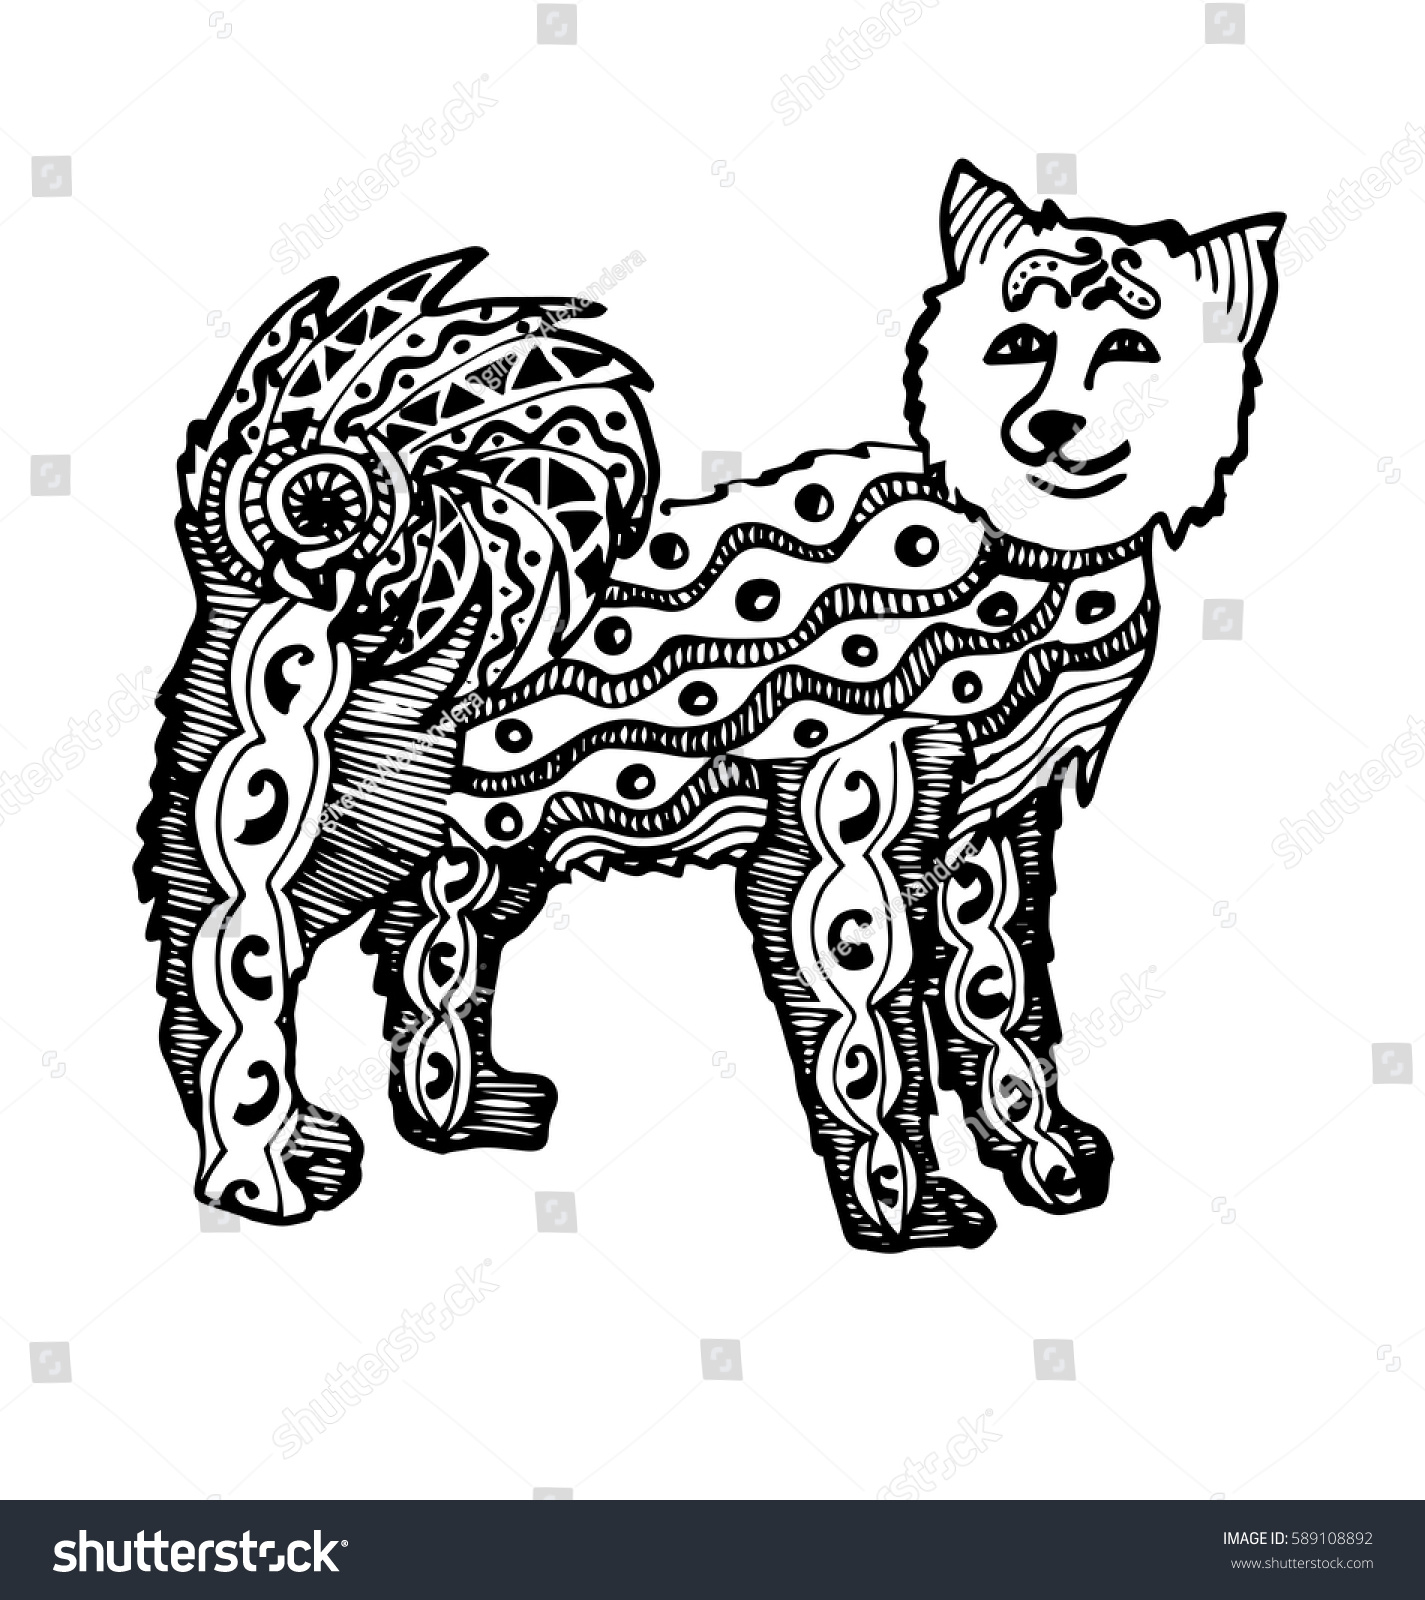 Download Illustration Icelandic Sheepdog Created Doodle Style Stock Vector 589108892 - Shutterstock